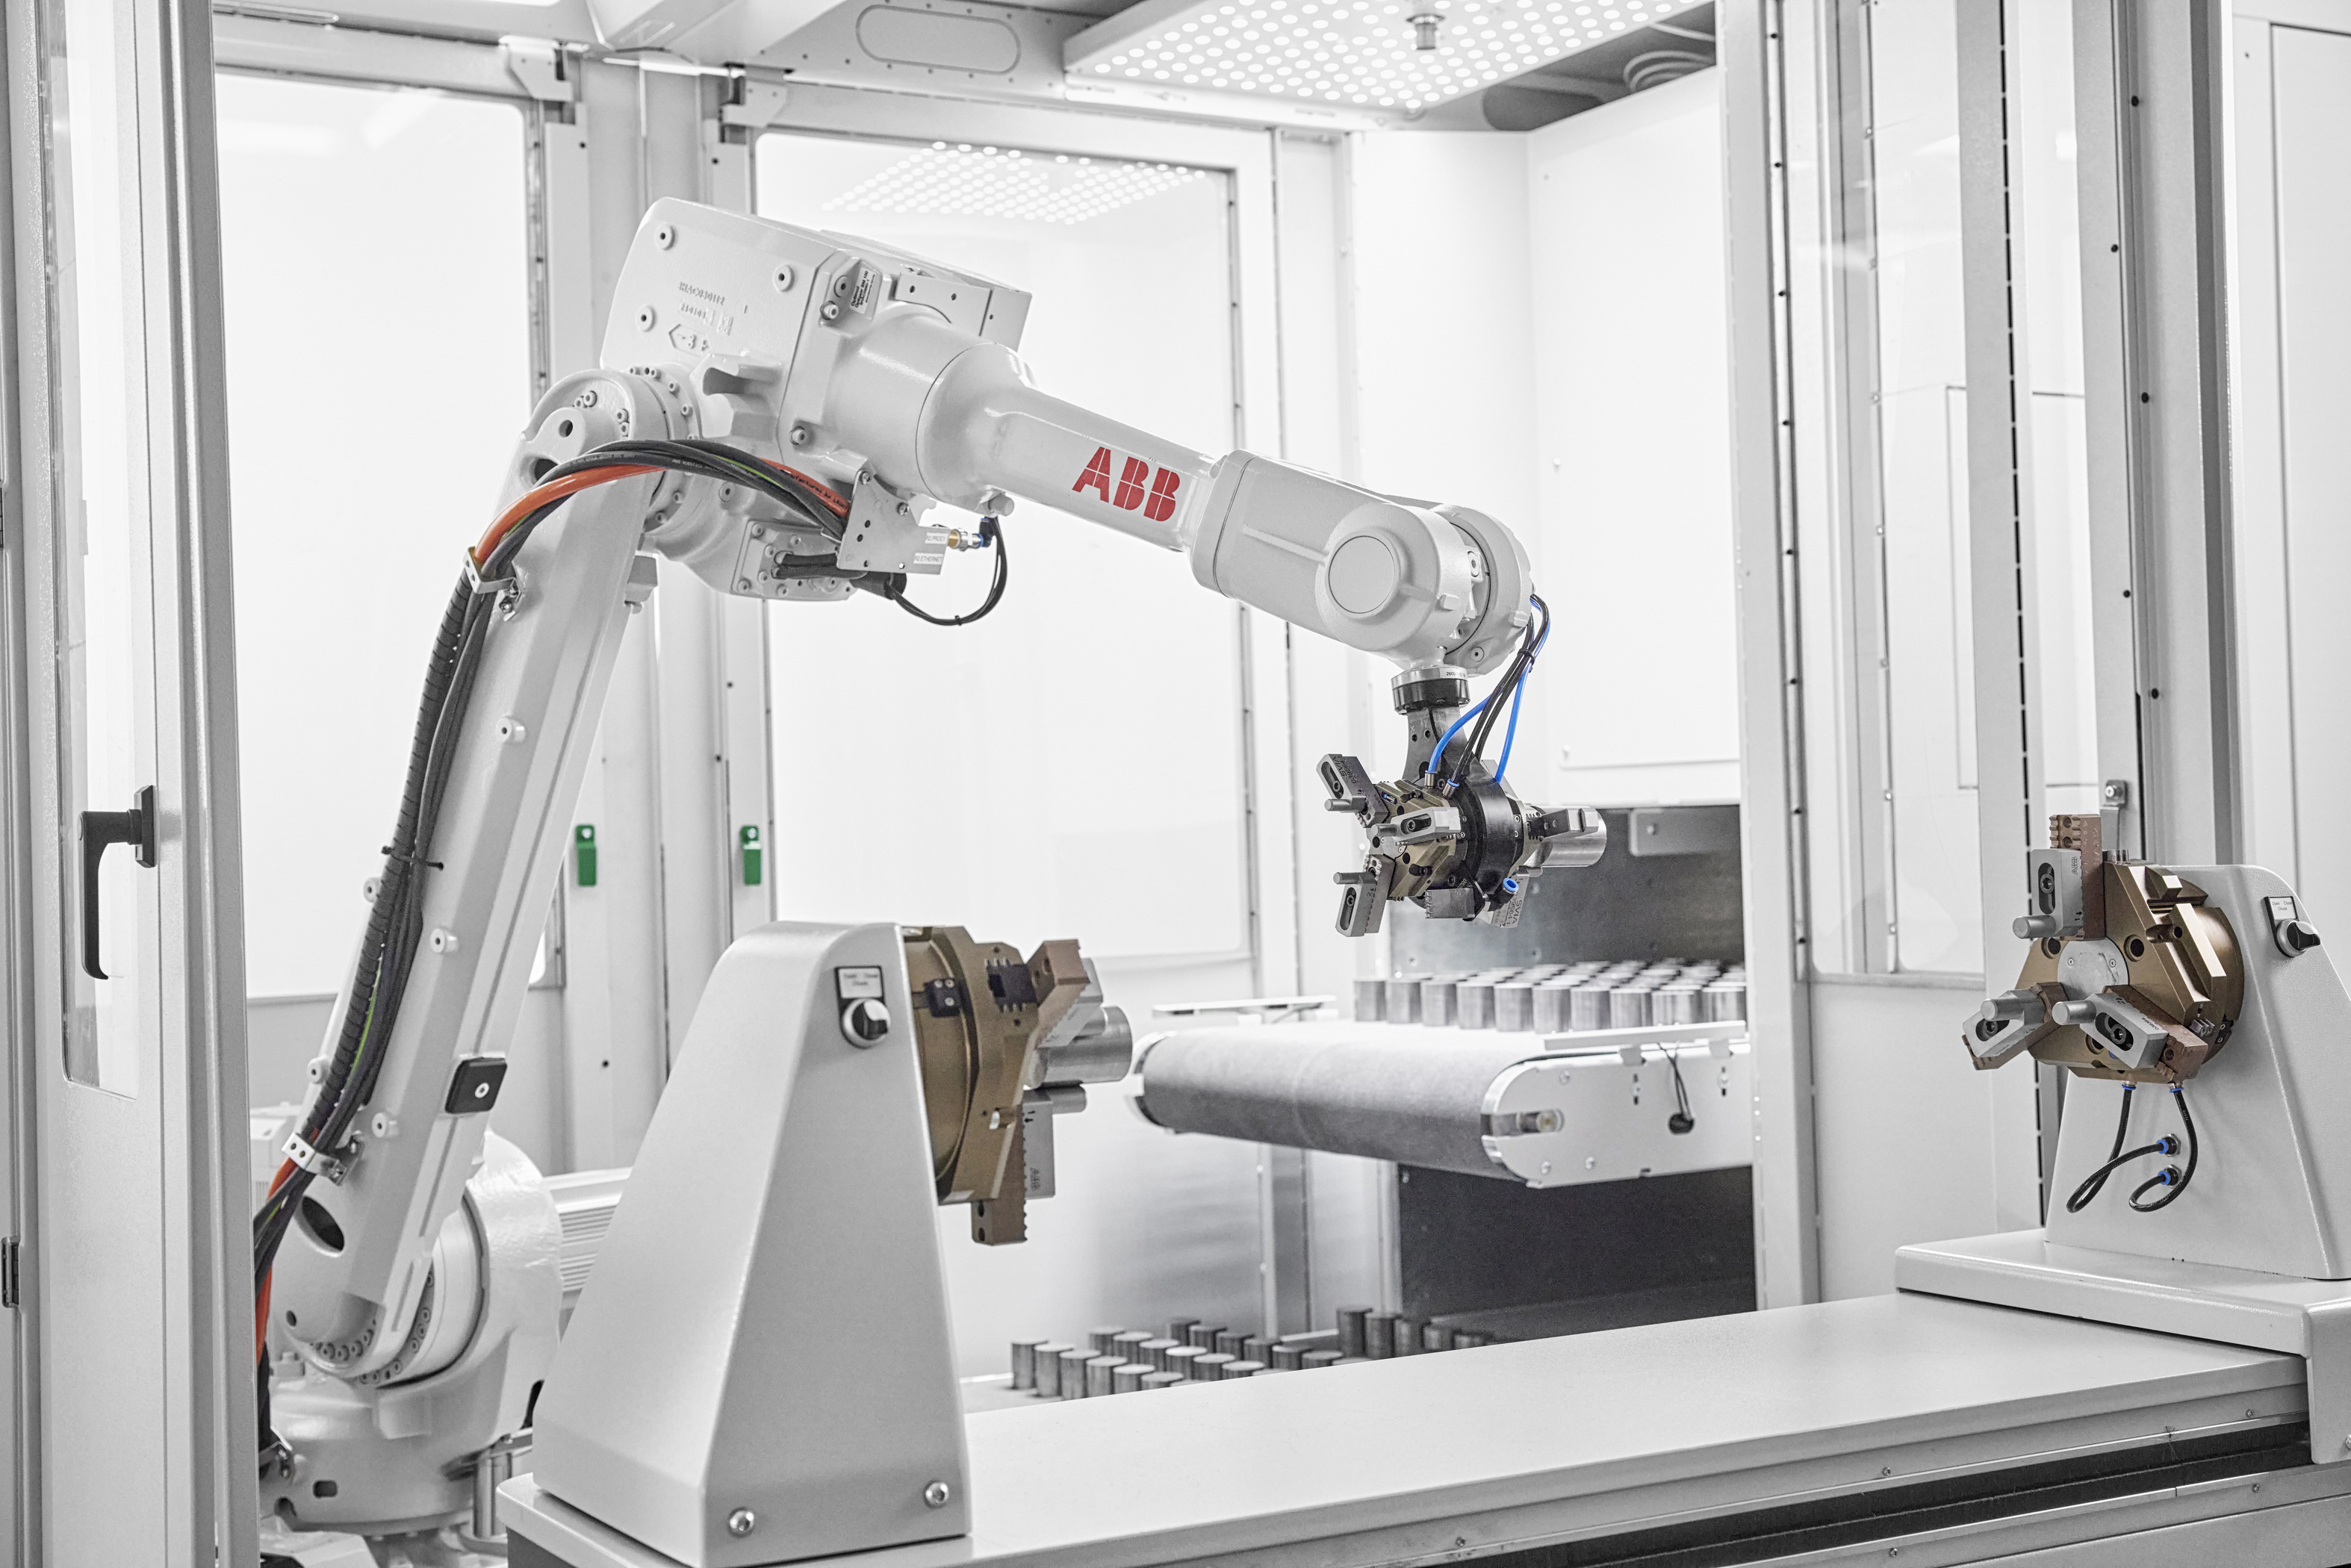 ABB’s FlexLoader M offers a flexible and expandable solution for a wide variety of machine tending applications including lathes, mills, CNC and machining centers. (Image courtesy of ABB Robotics)